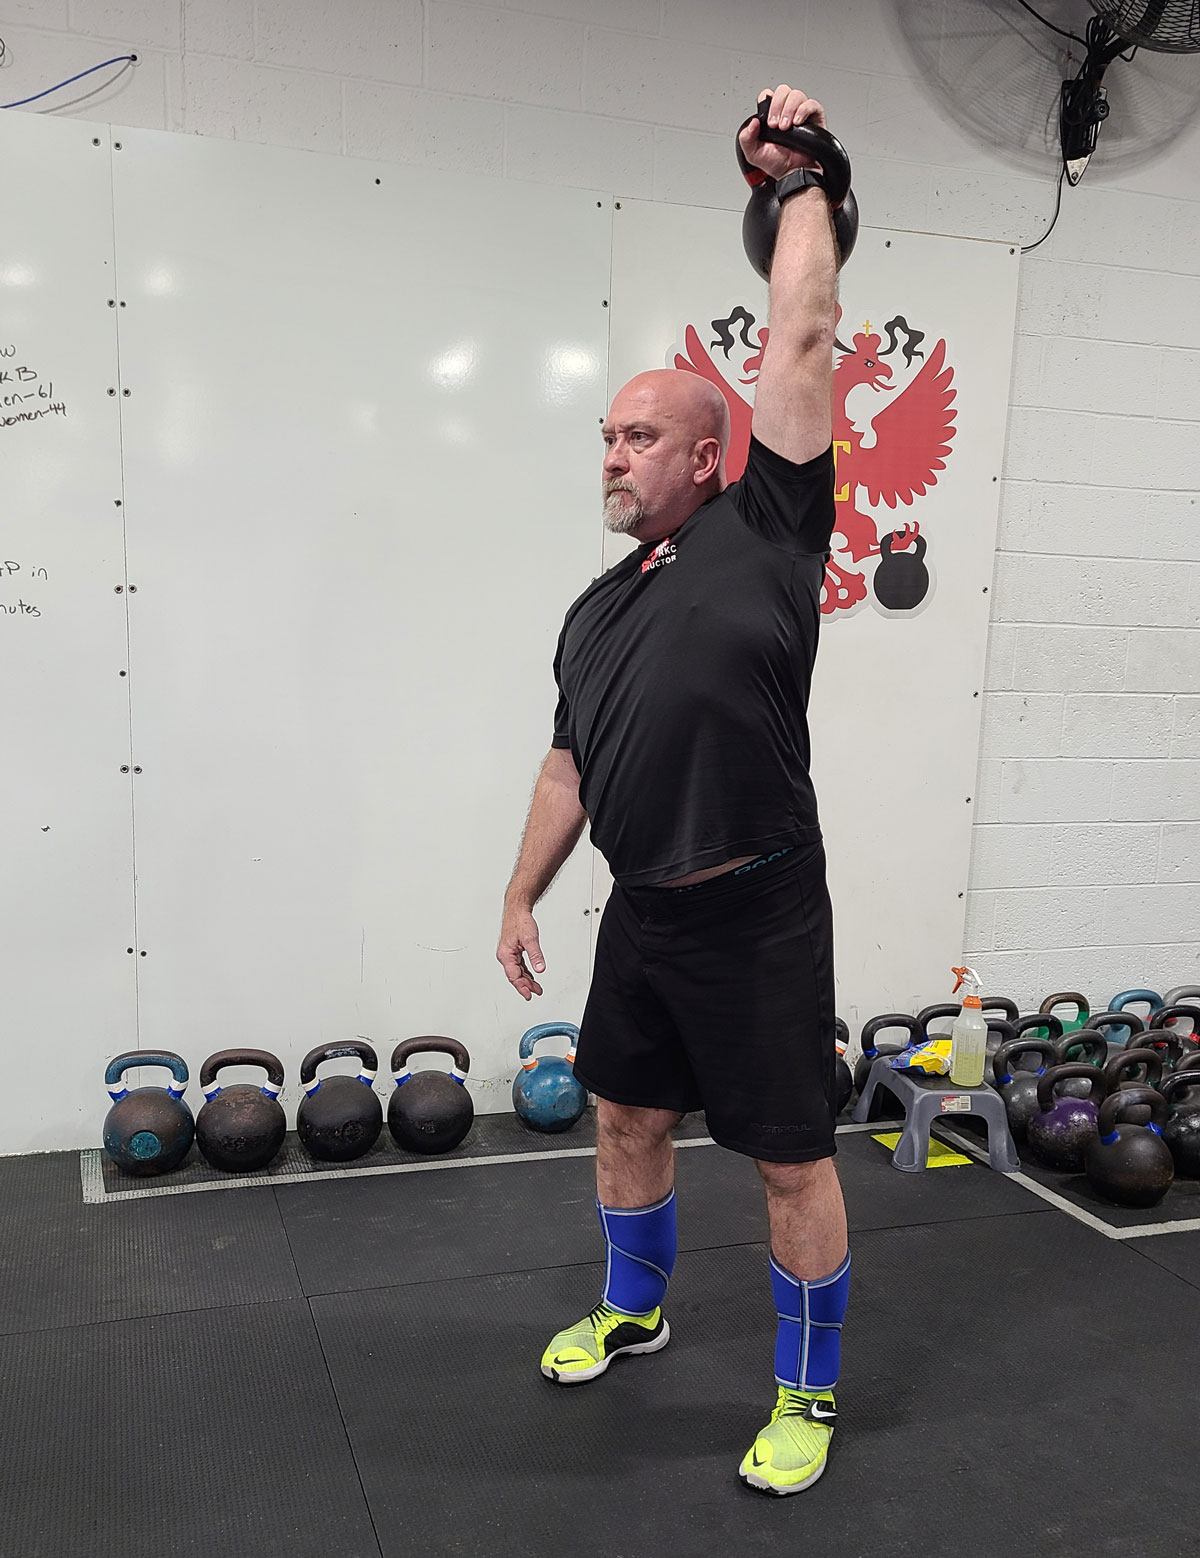 Master RKC Michael Krivka Demonstrates the overhead lockout position of the kettlebell snatch